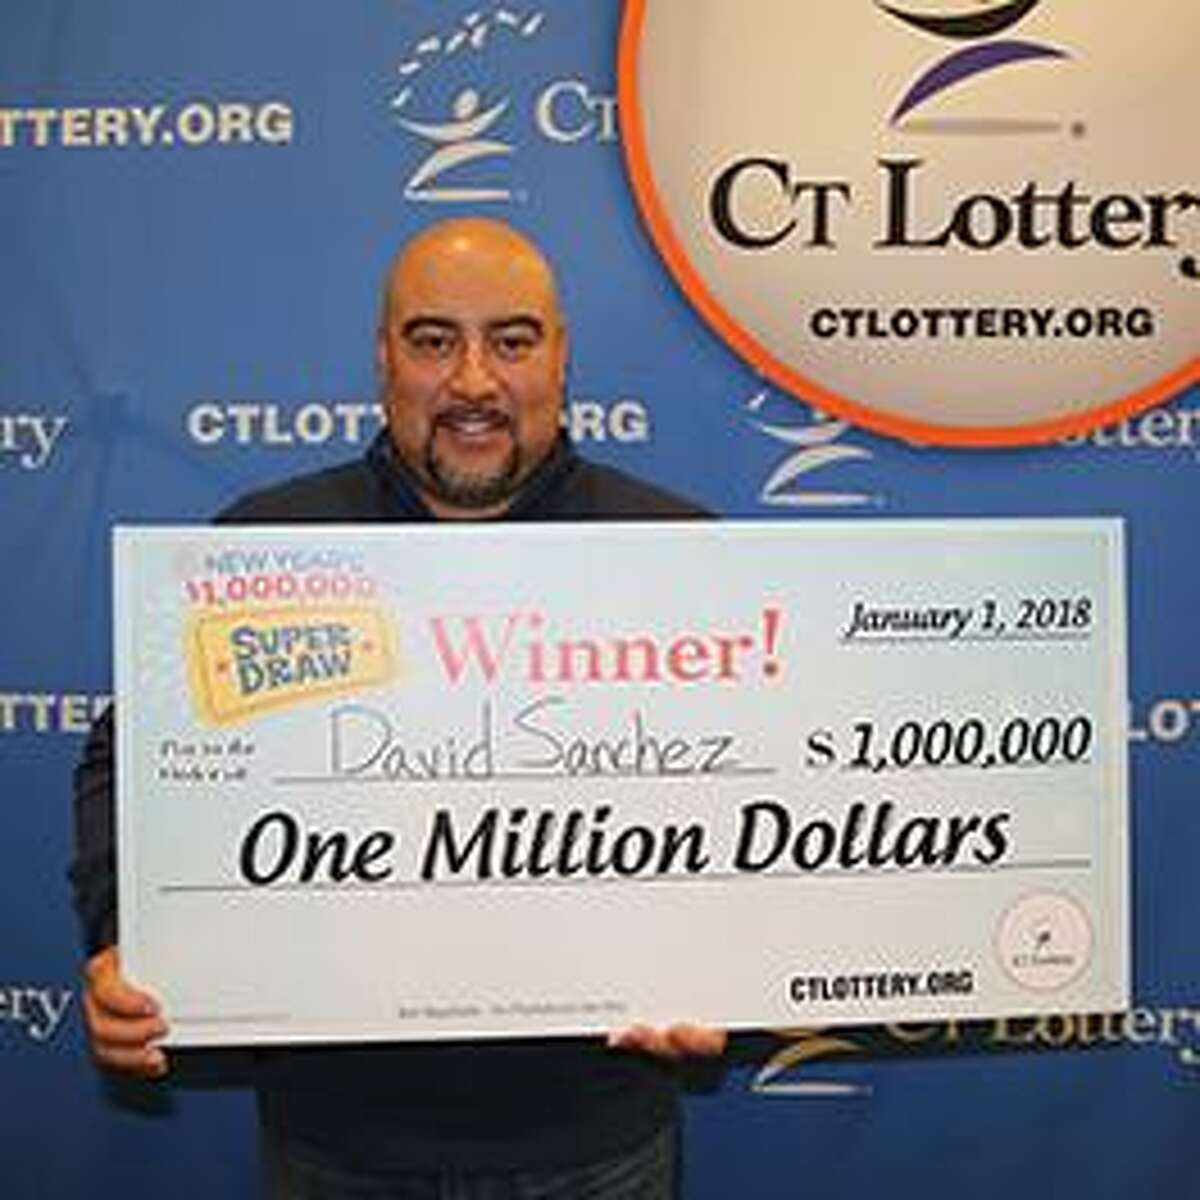 David Sanchez, of Bridgeport, holds his $1 million winning prize in CT Super Draw lottery ticket.